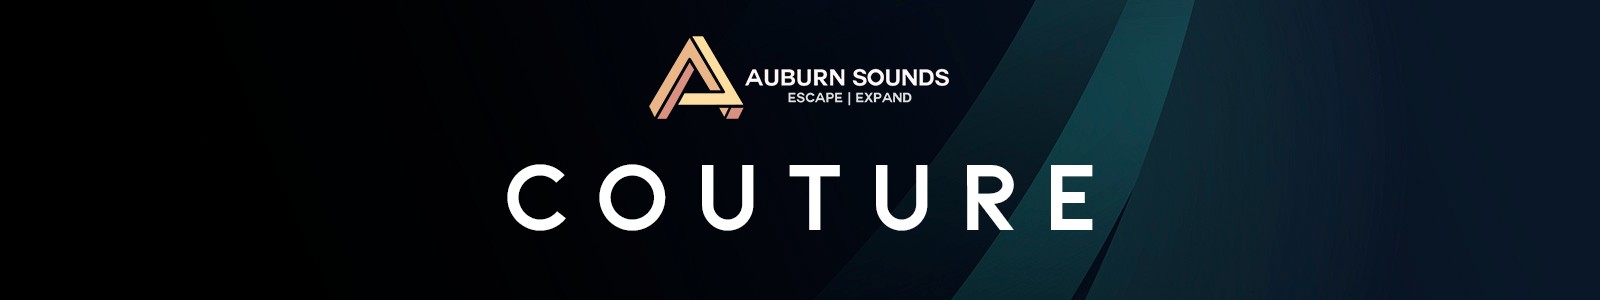 Couture by Auburn Sounds